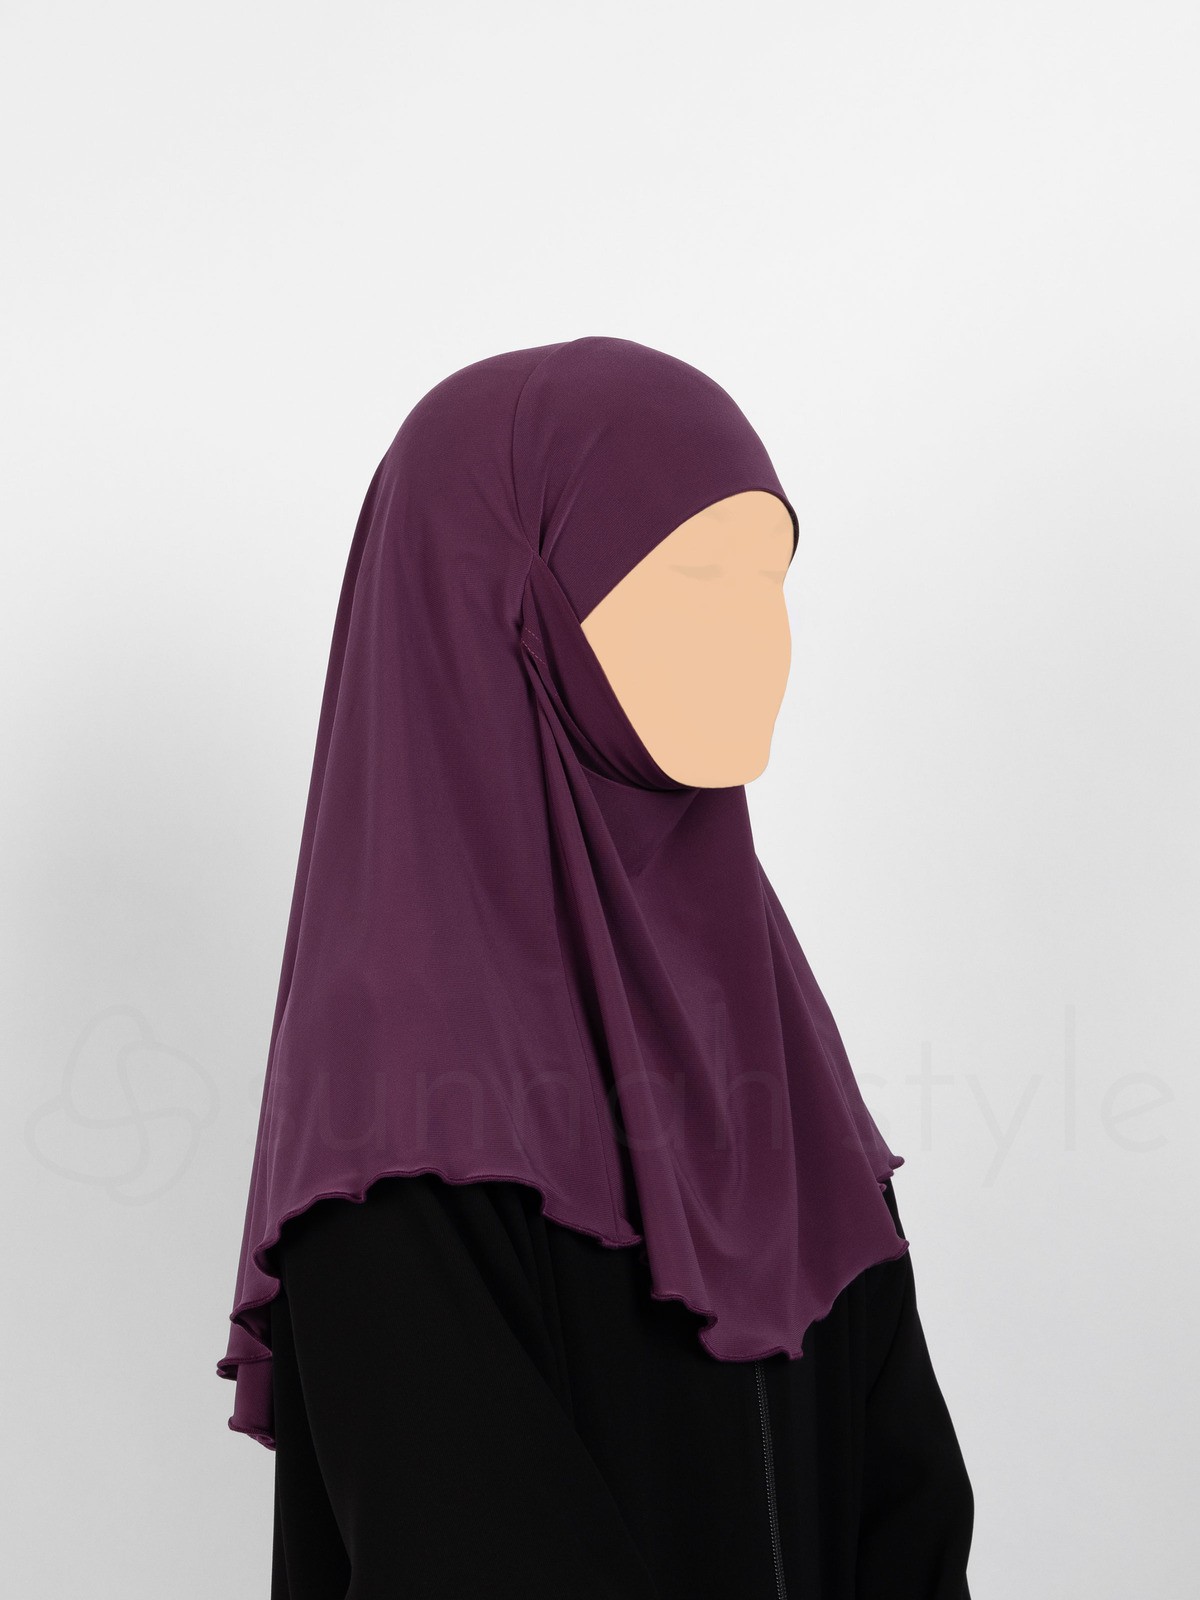 Sunnah Style - Girls Jersey Khimar (Mulberry)